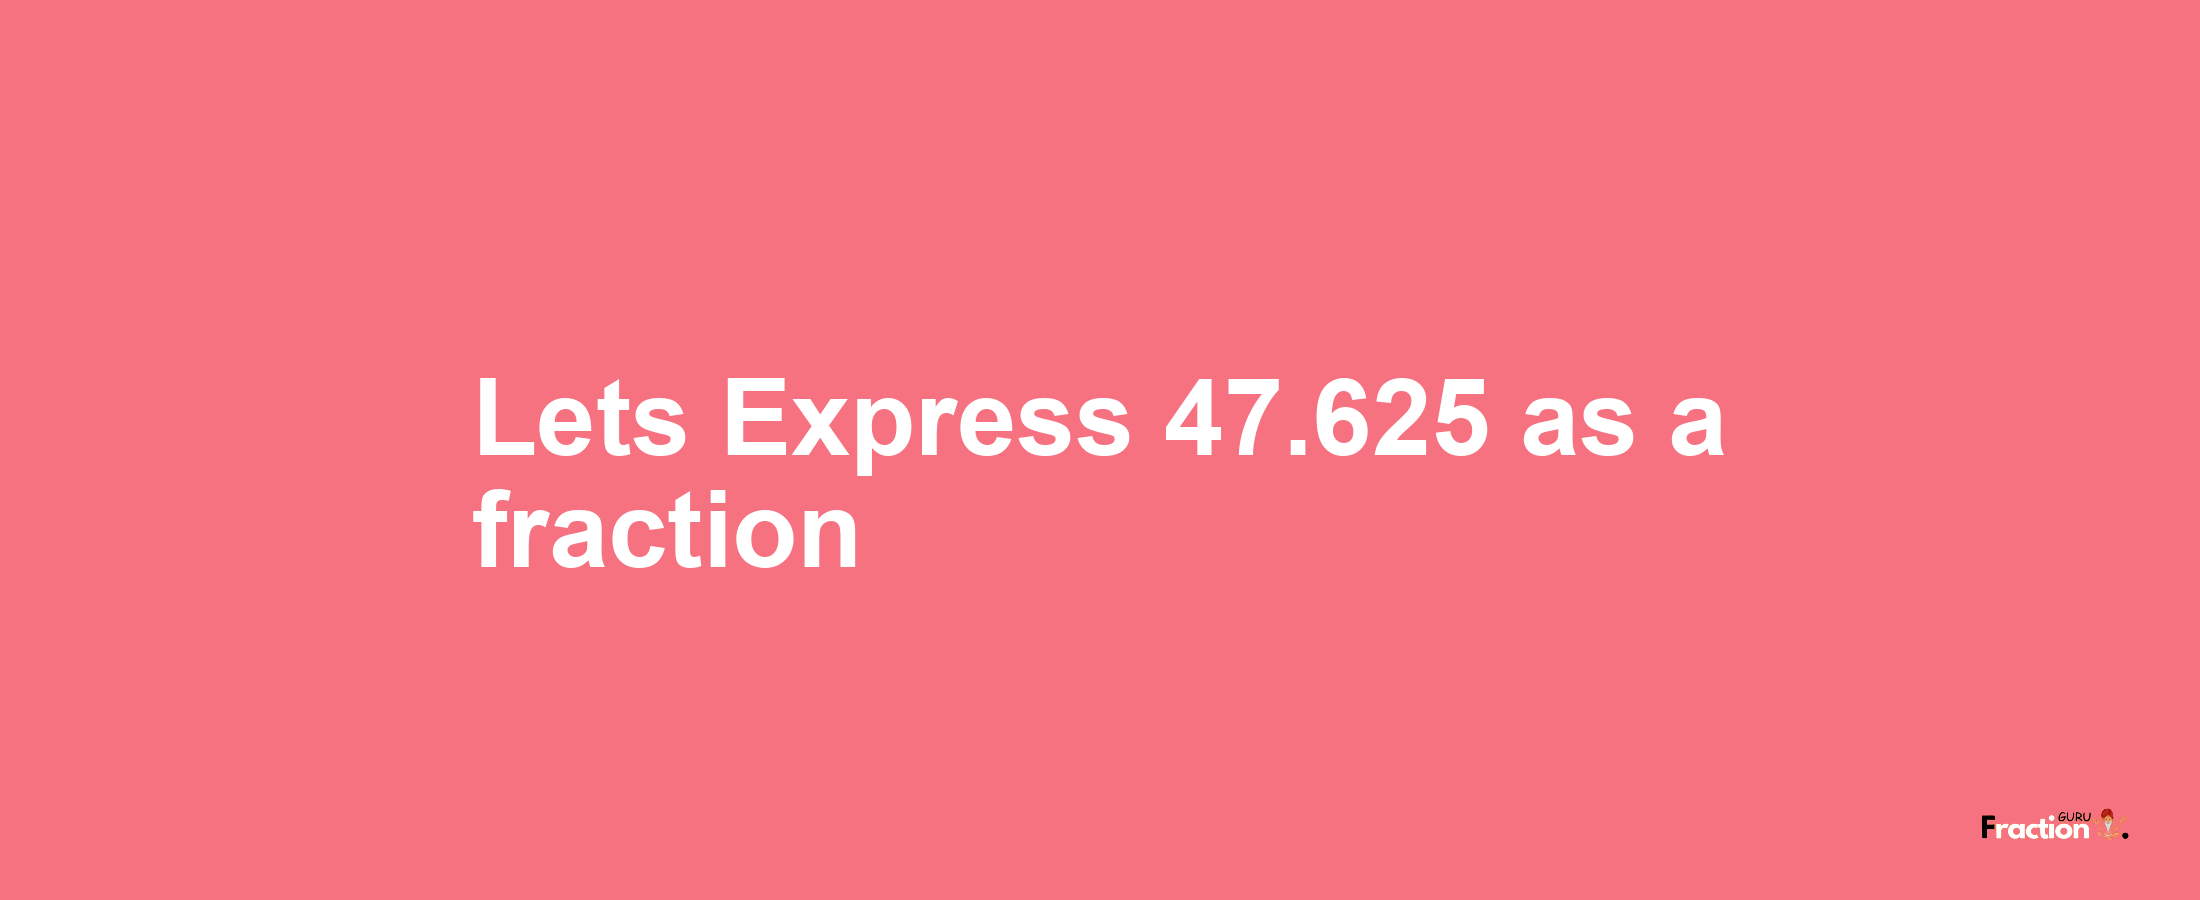 Lets Express 47.625 as afraction